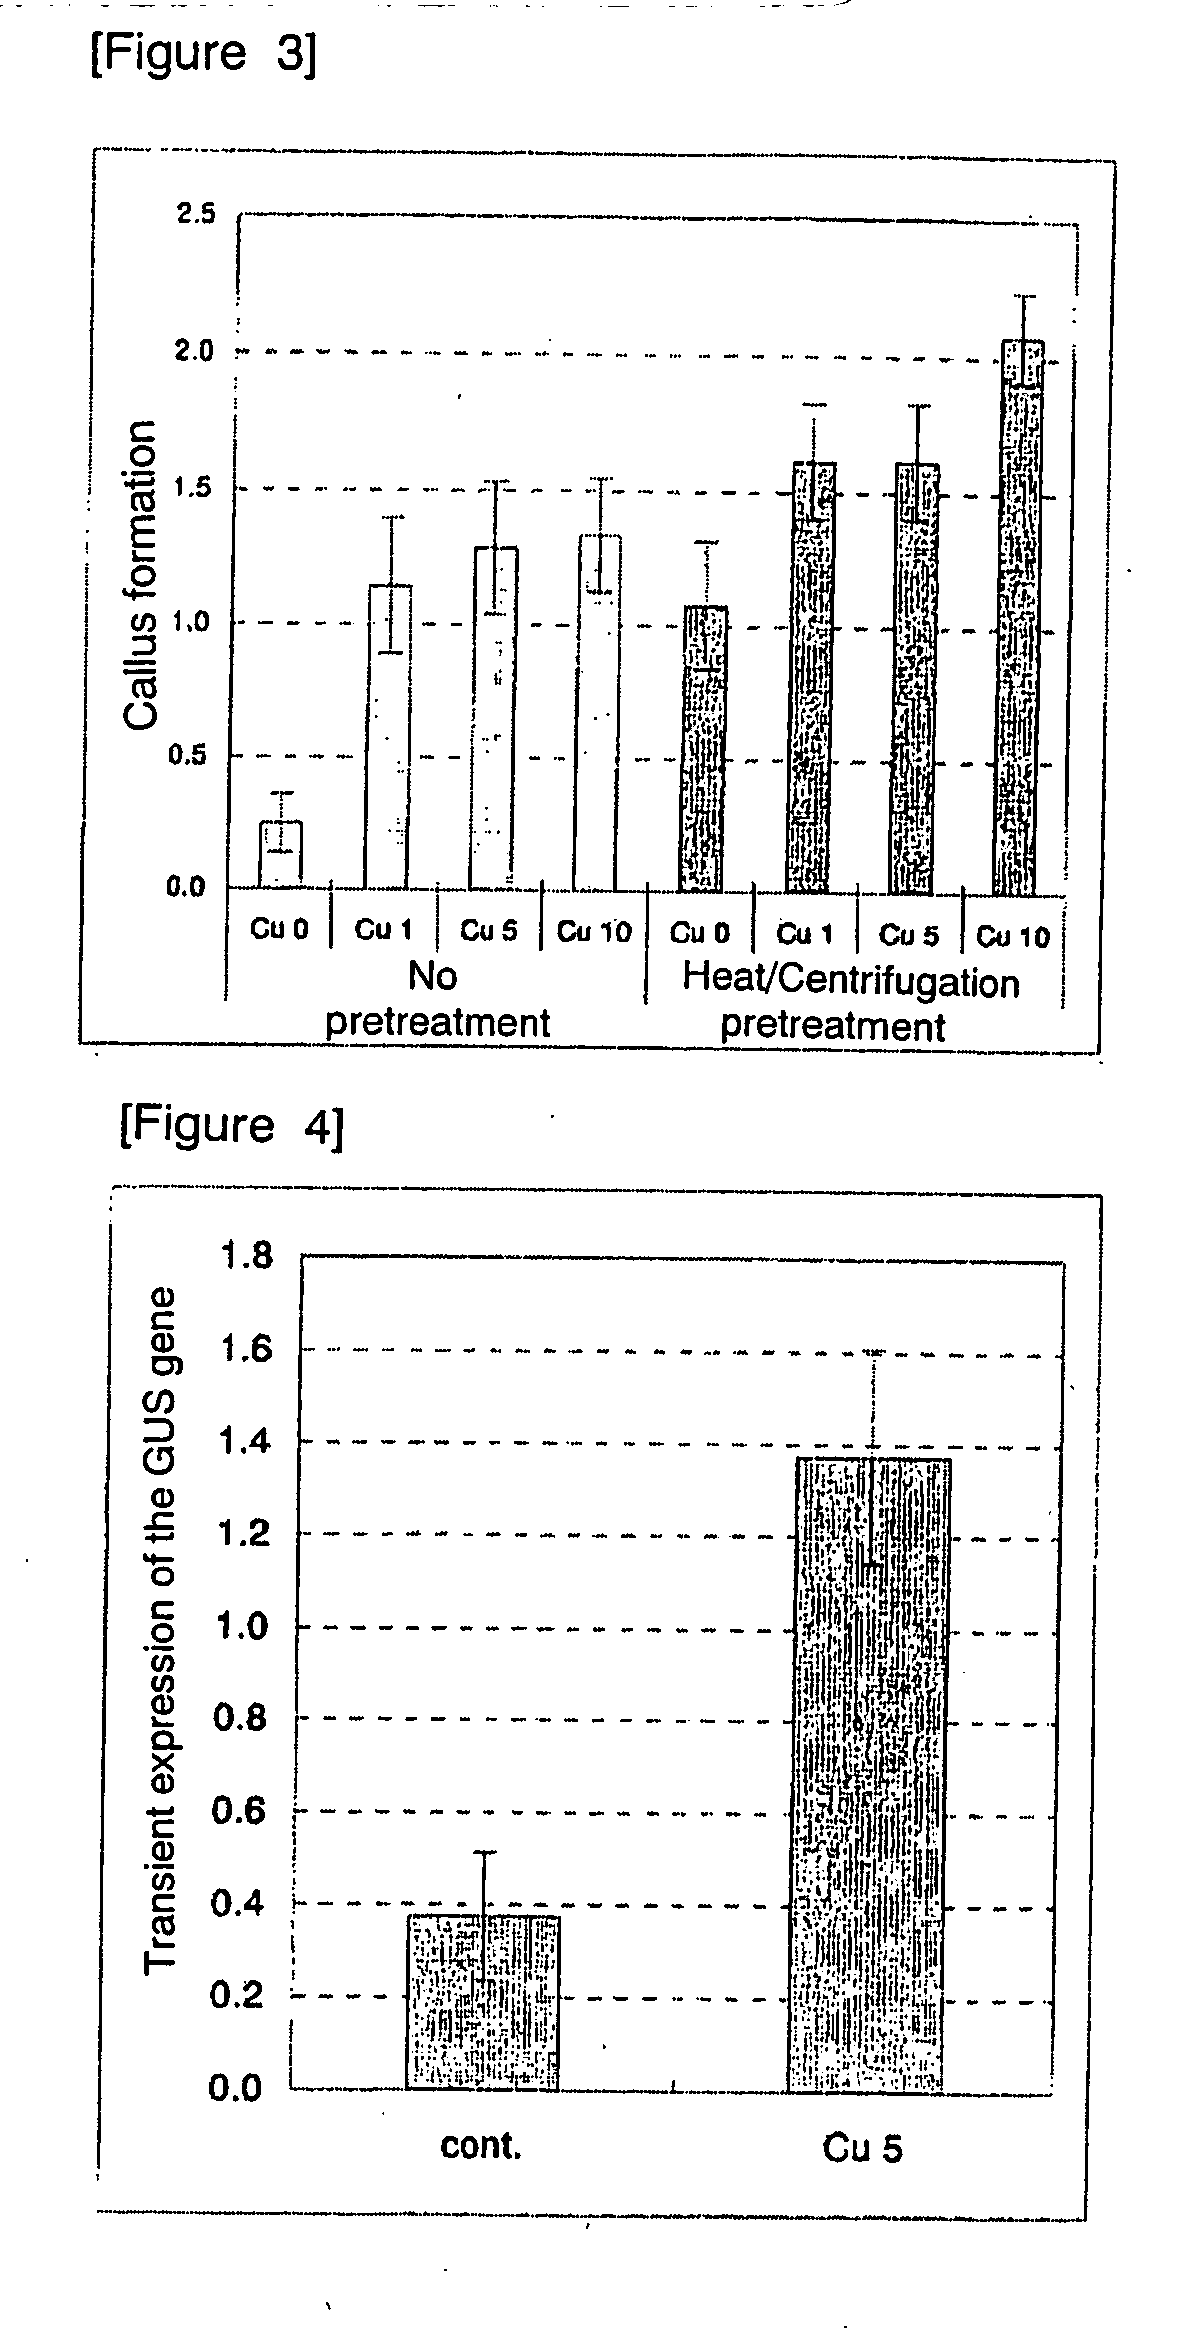 Method for improving plant transformation efficiency by adding copper ion